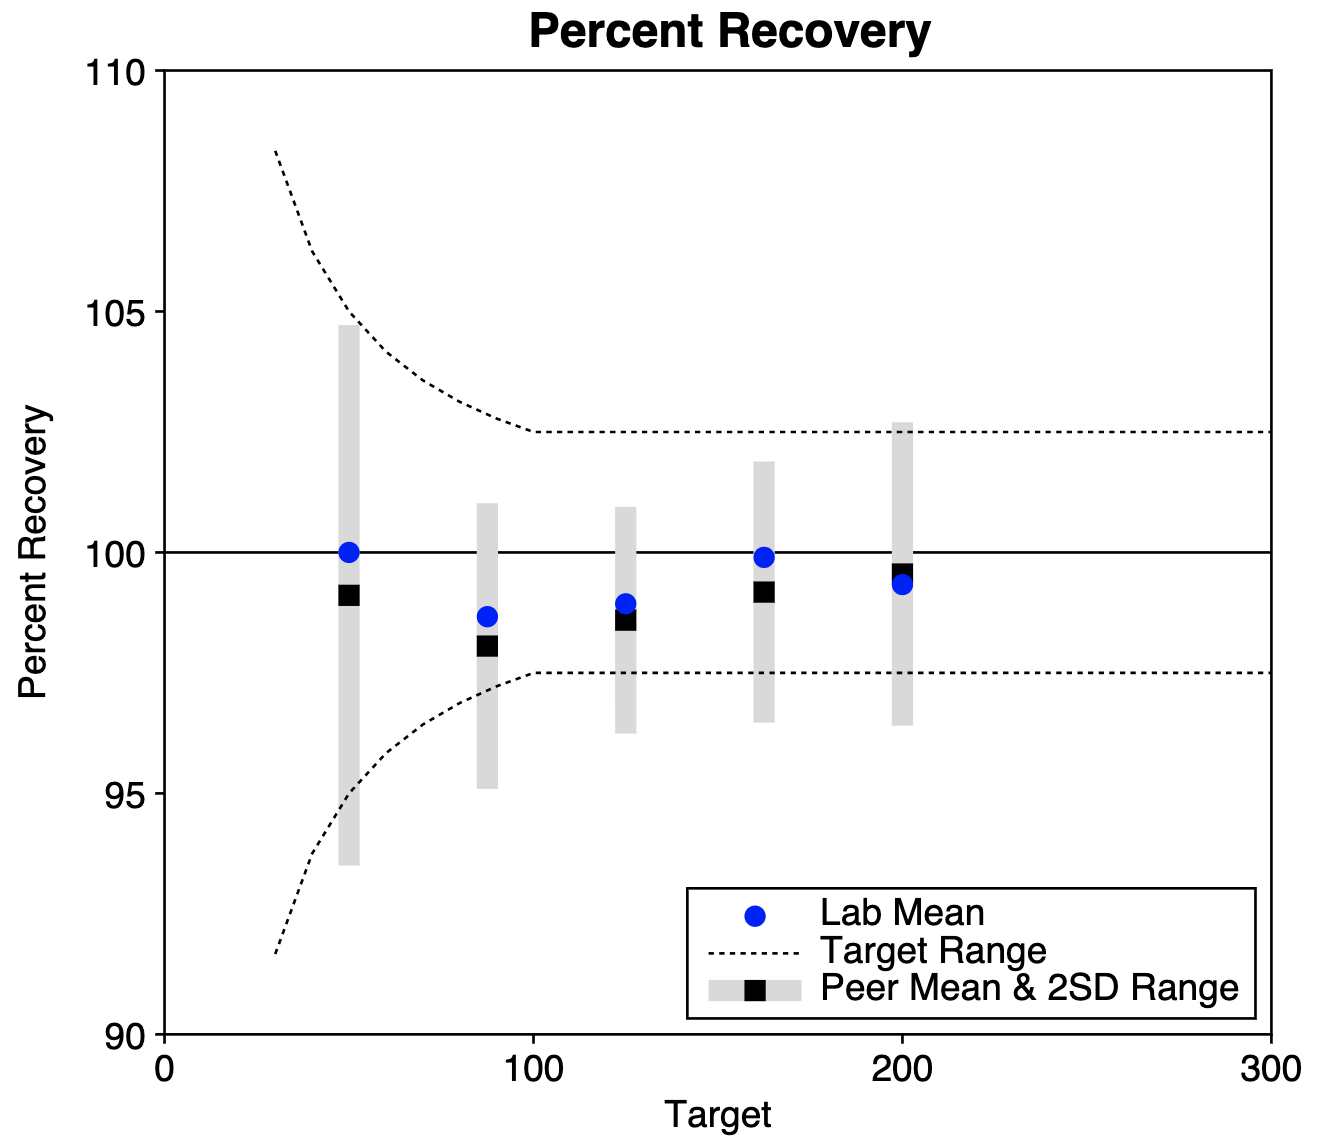 Percent Recovery